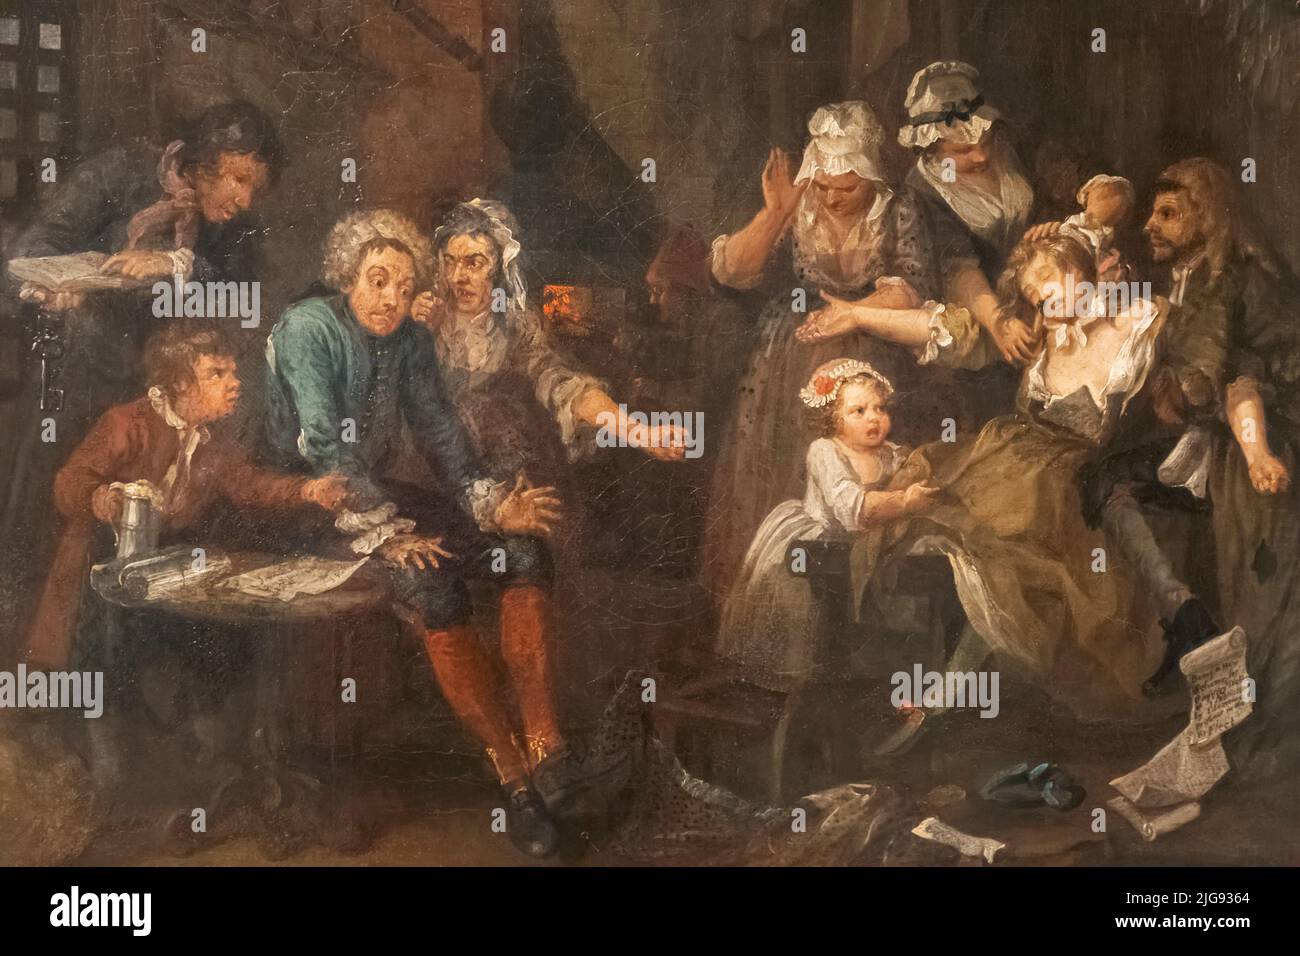 Painting from The Rake's Progress titled 'The Prison' by William Hogarth Stock Photo